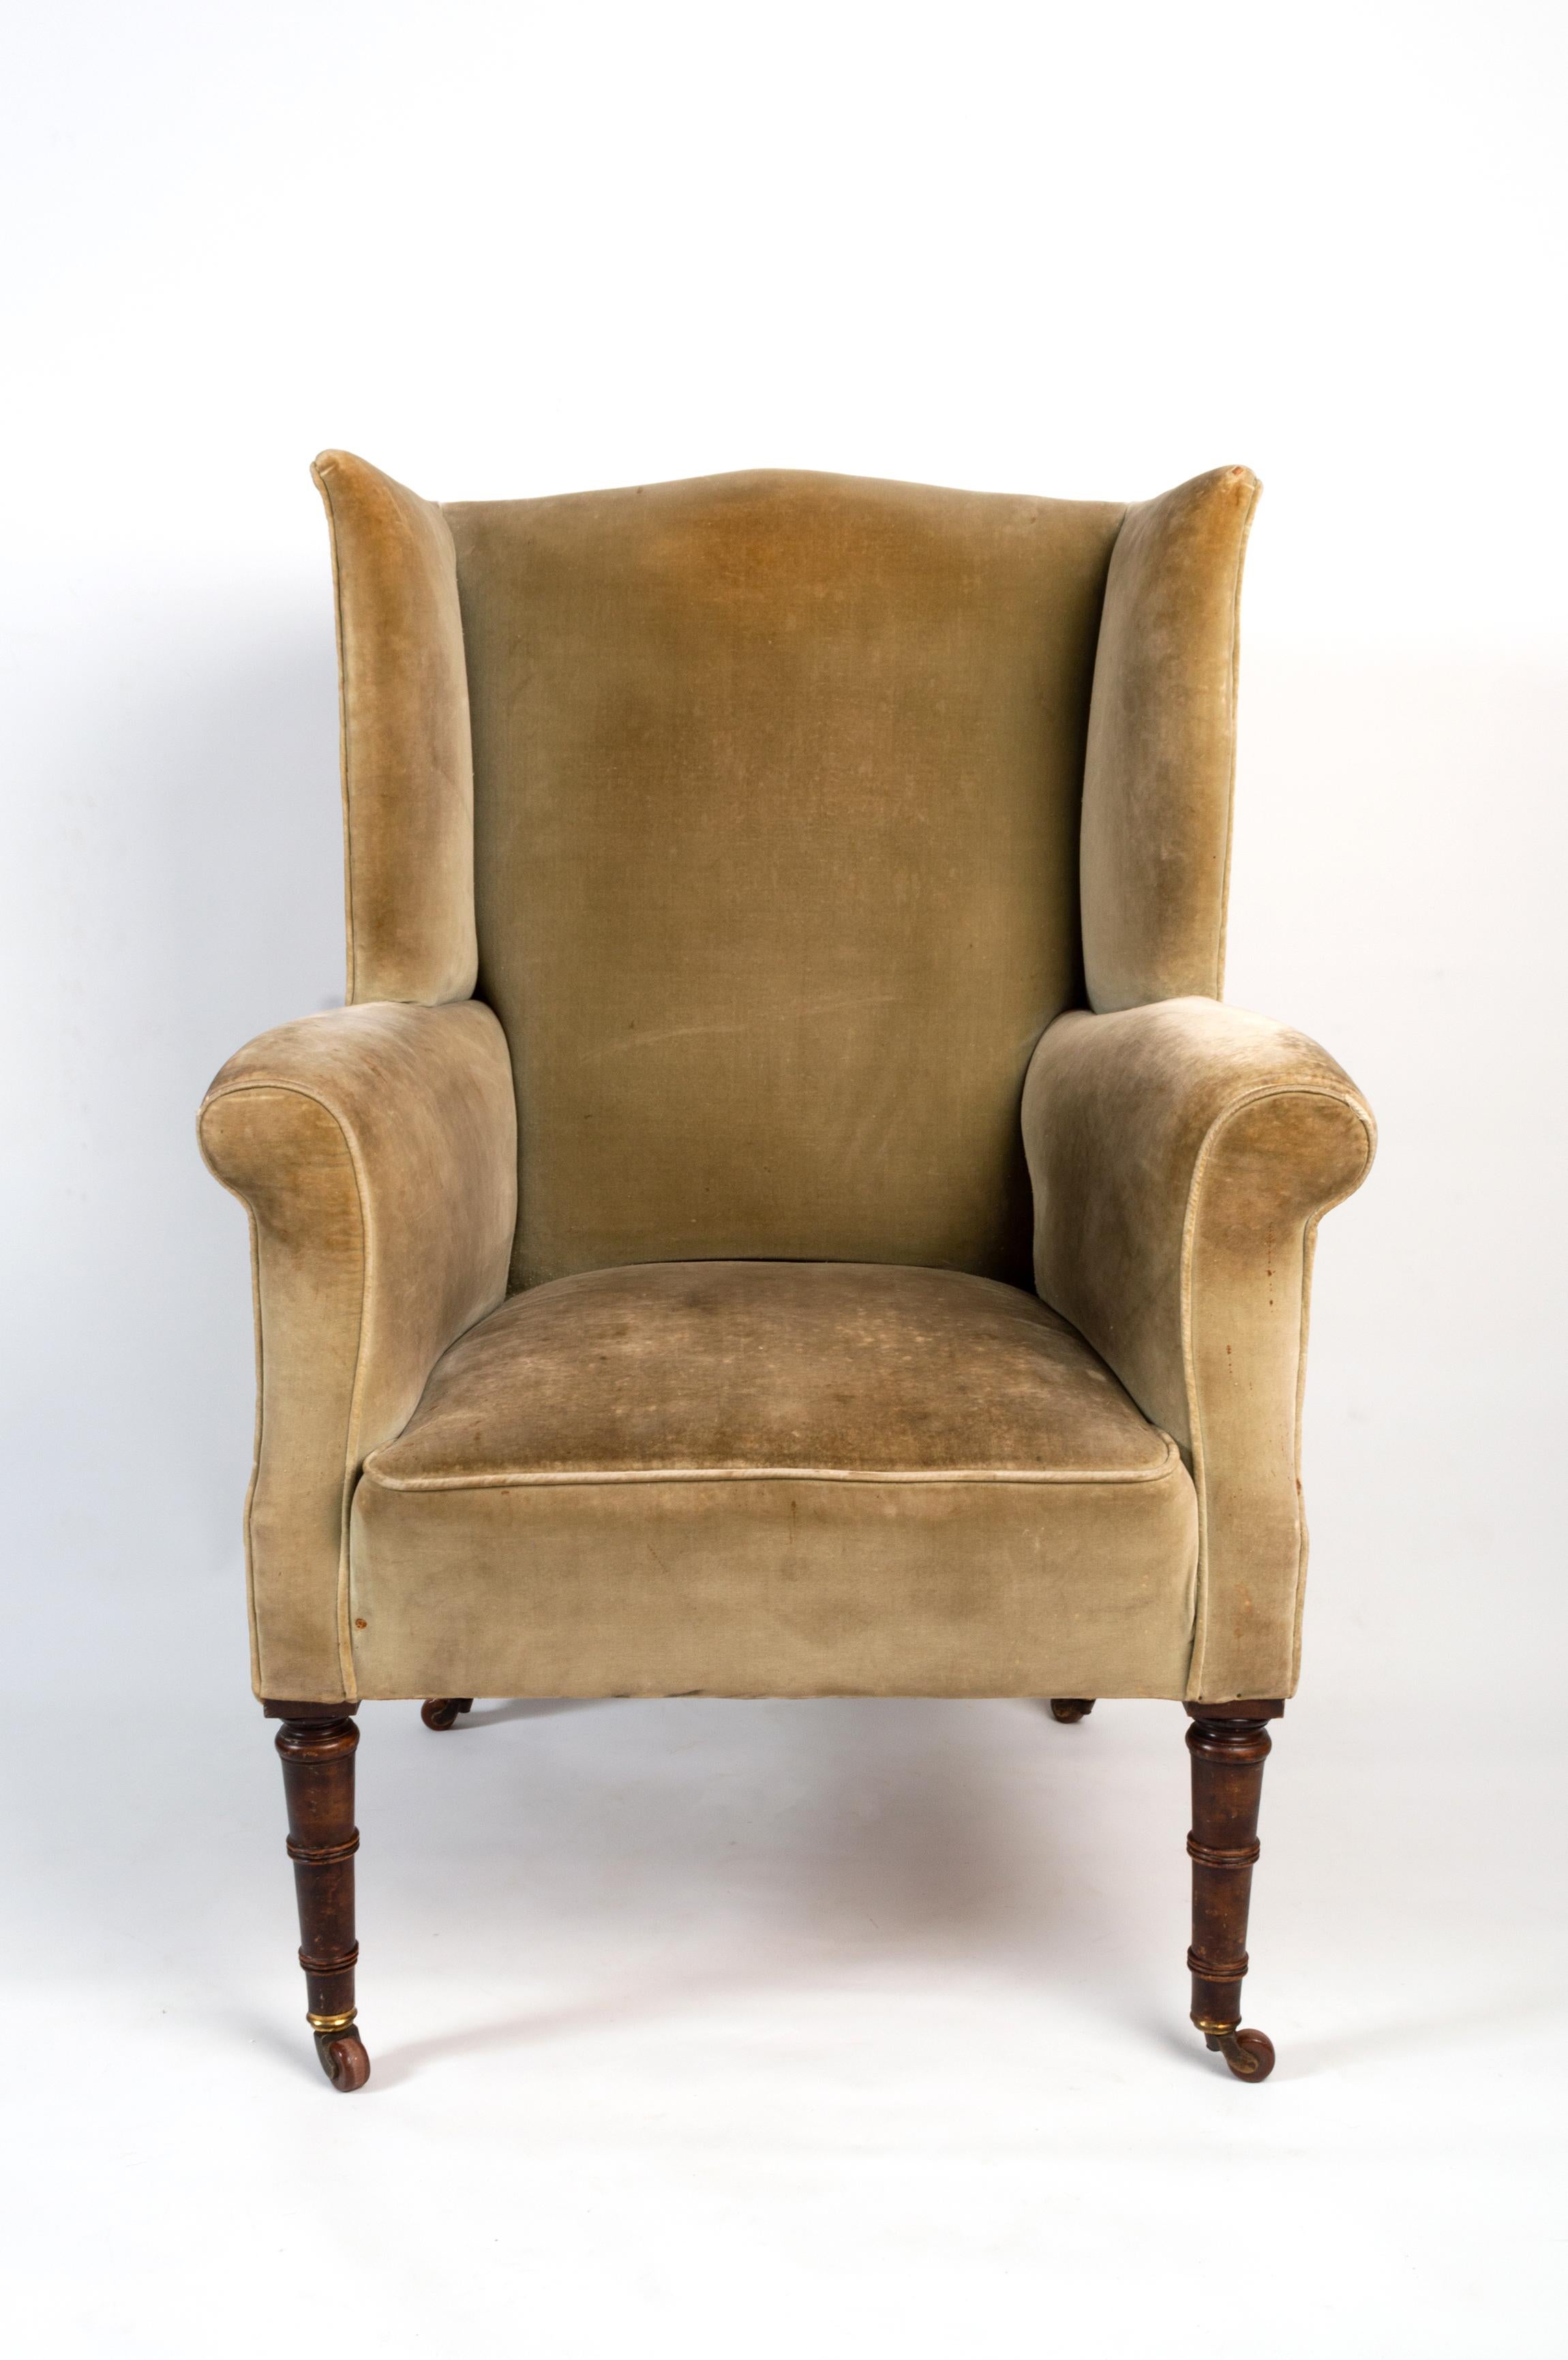 Antique English Regency Wing Armchair, circa 1820 For Sale 3